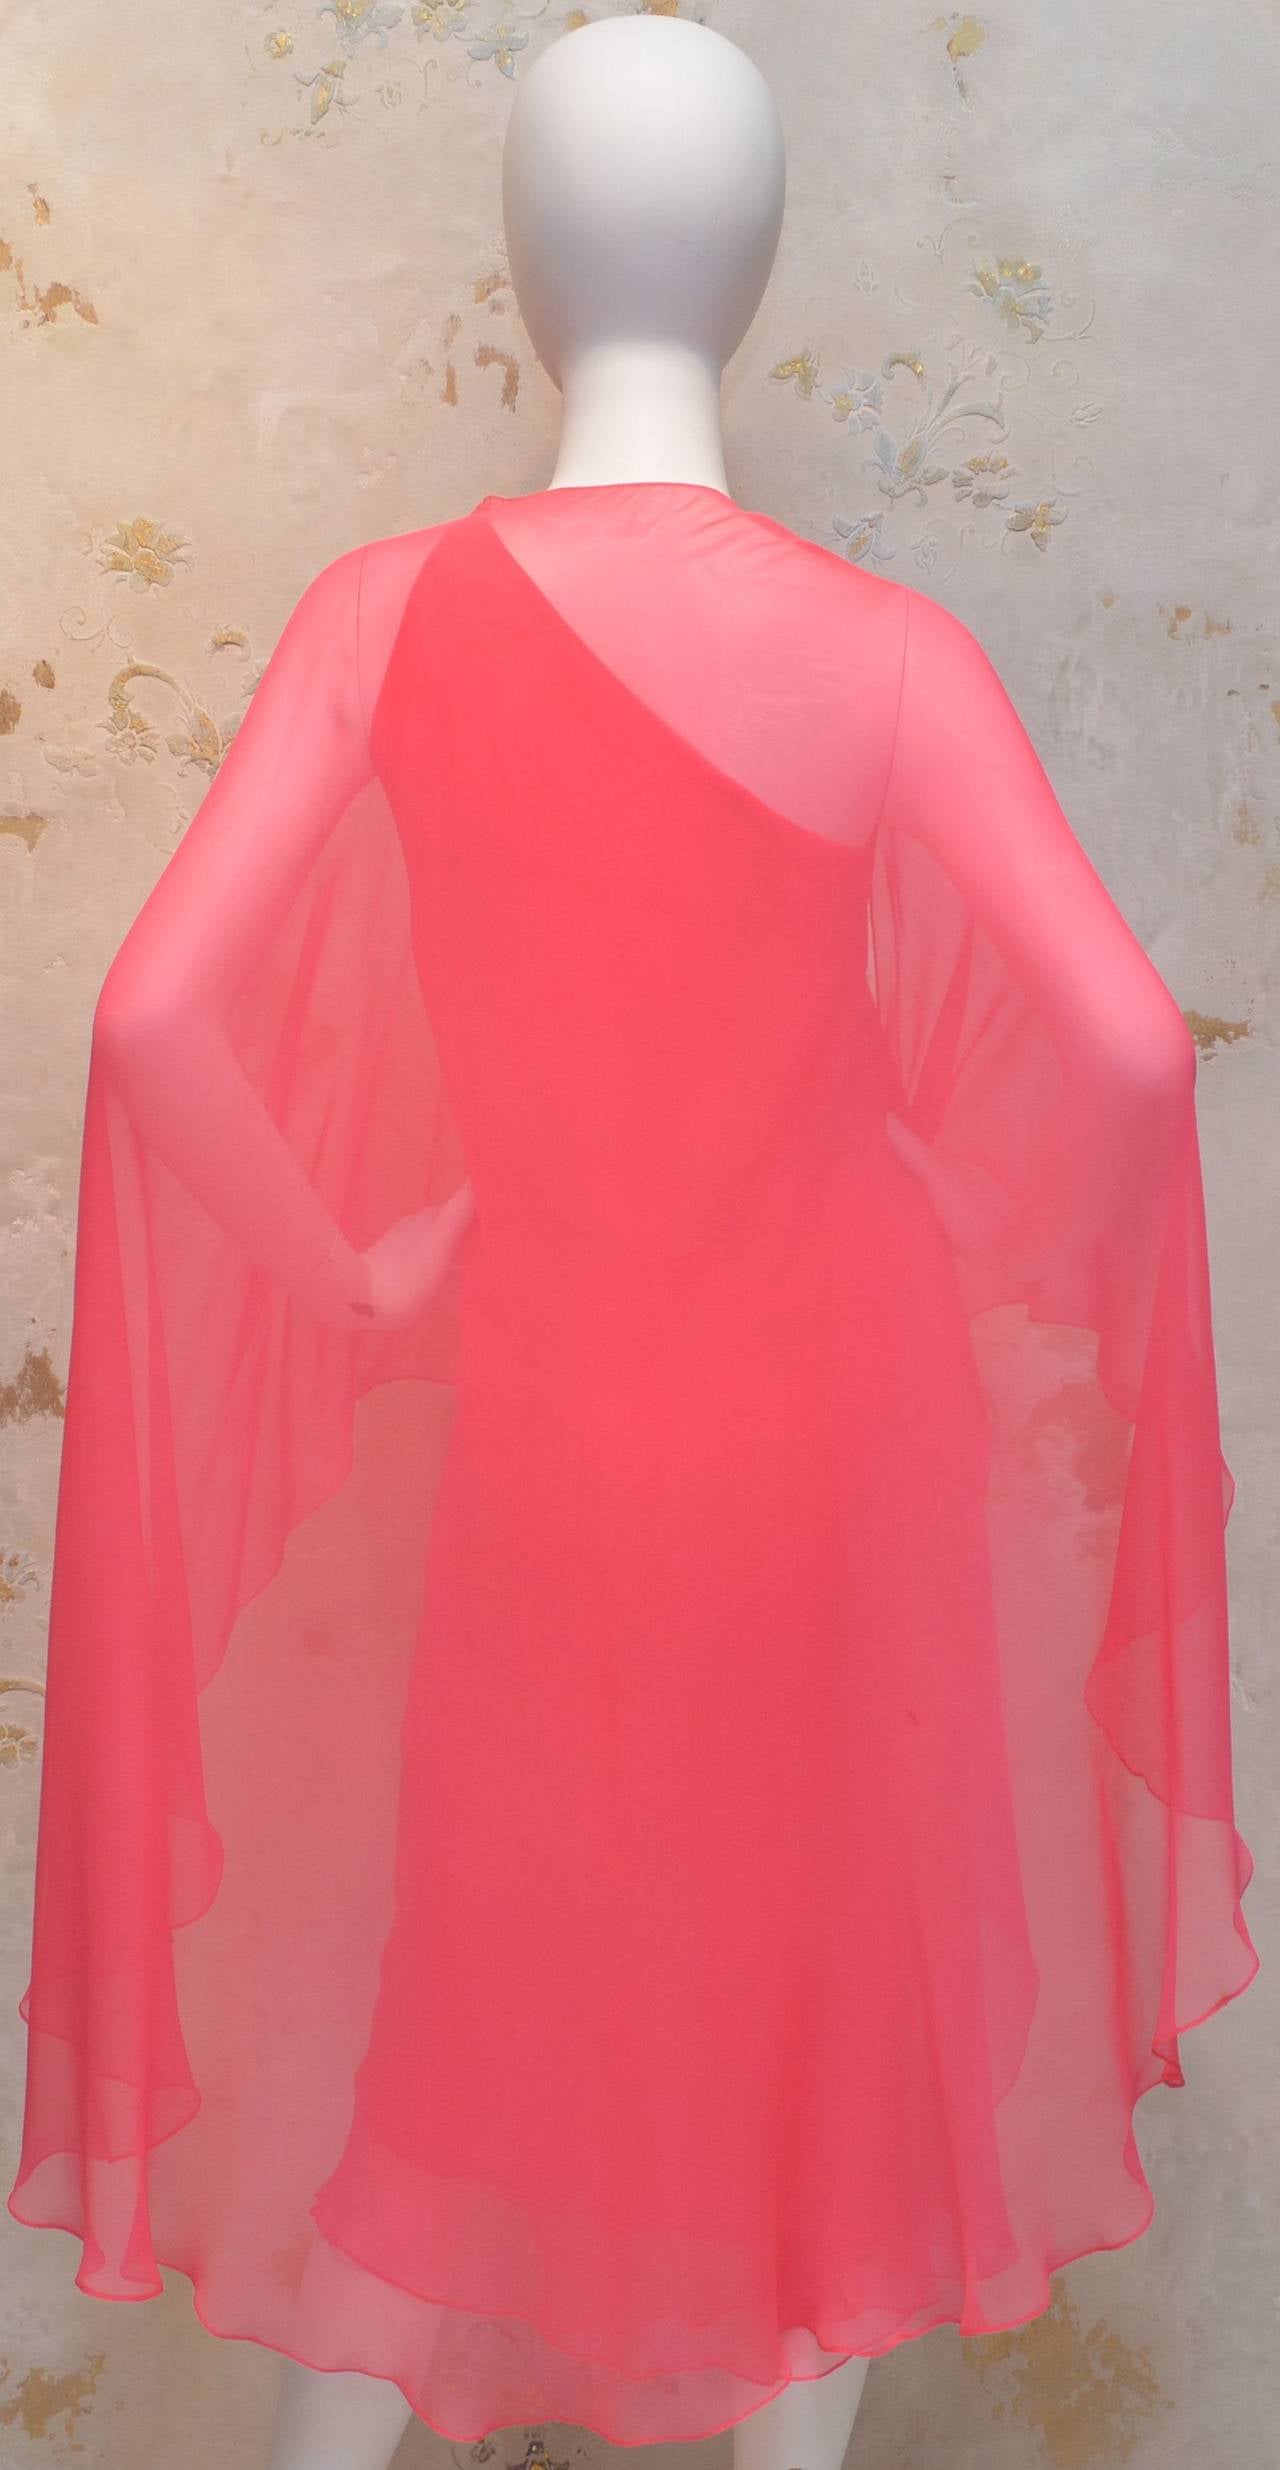 Features a hook-and-eye closure at one shoulder, opposite shoulder is covered and also has a hook-and-eye closure. Dress is in great vintage condition! Label is missing. Dress fits the mannequin perfectly giving the measurements of:

Bust -